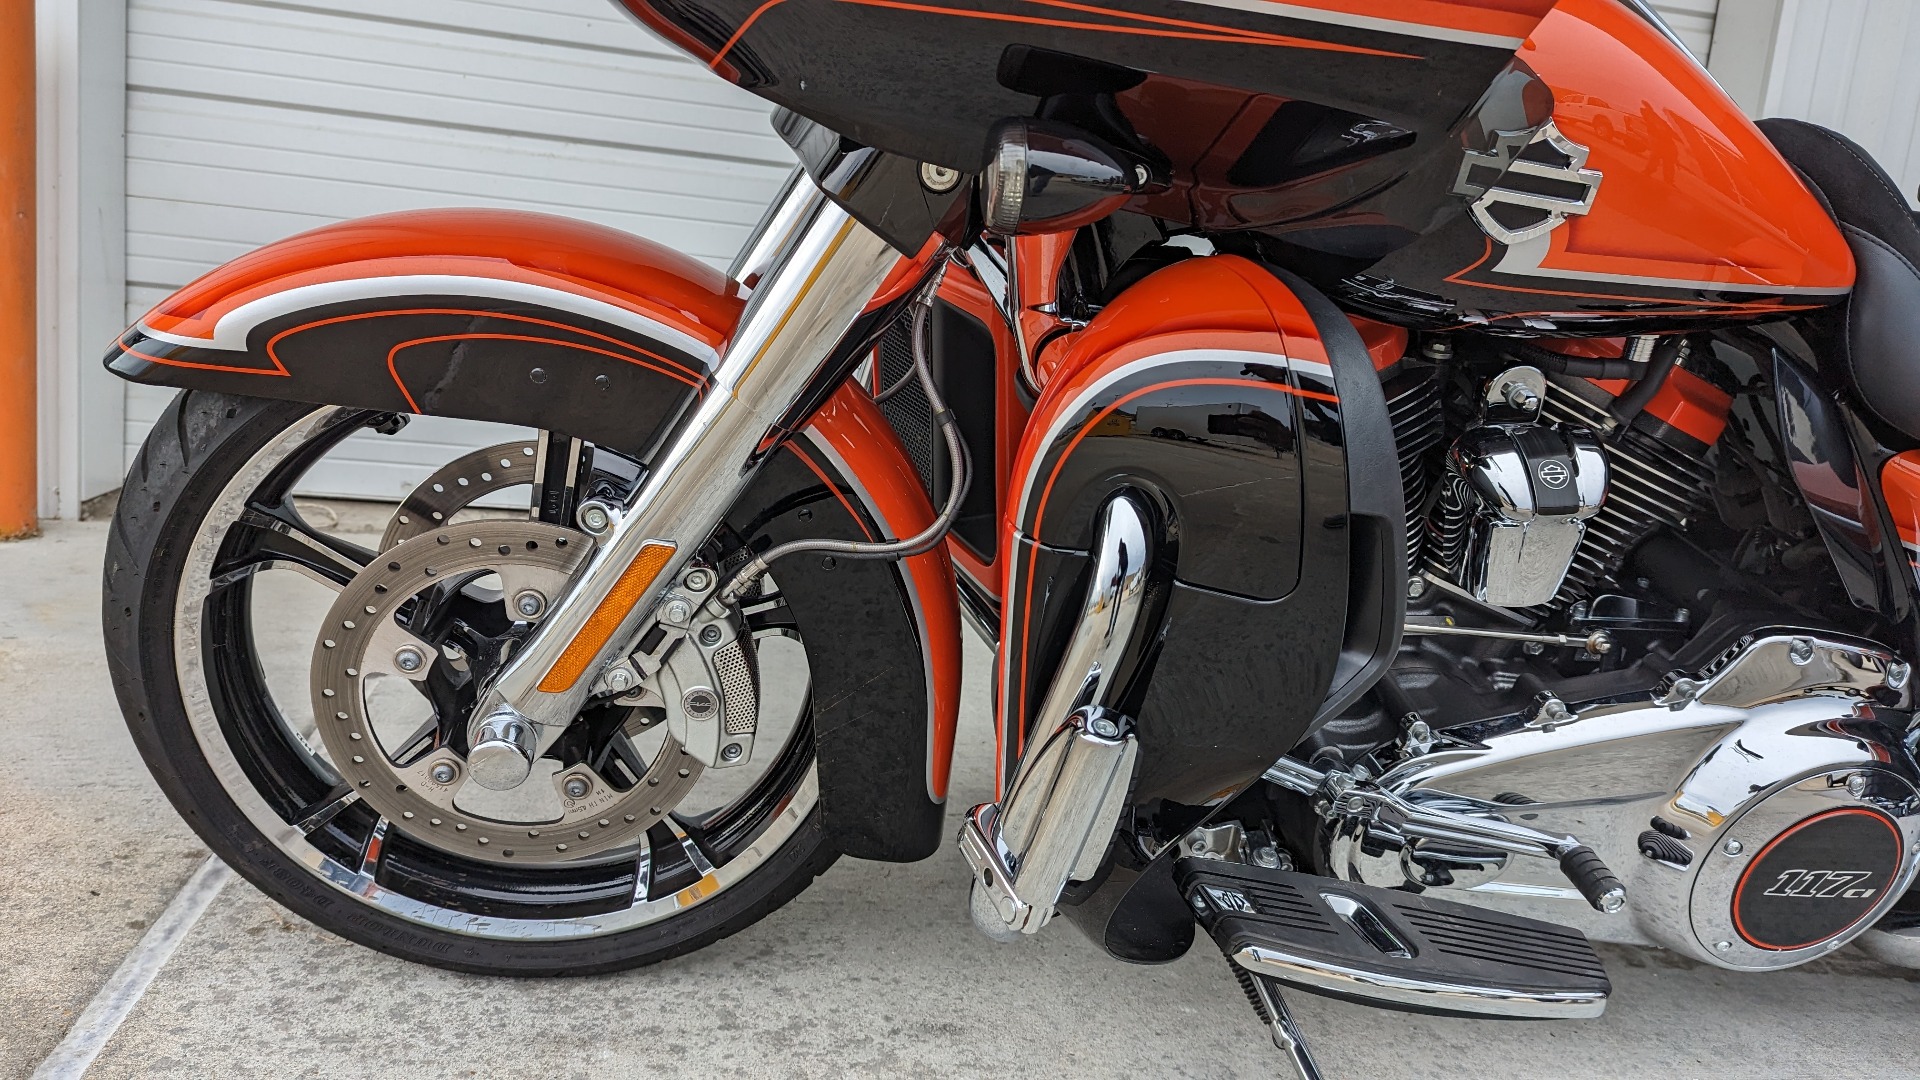 harley cvo road glides for sale in texas - Photo 6